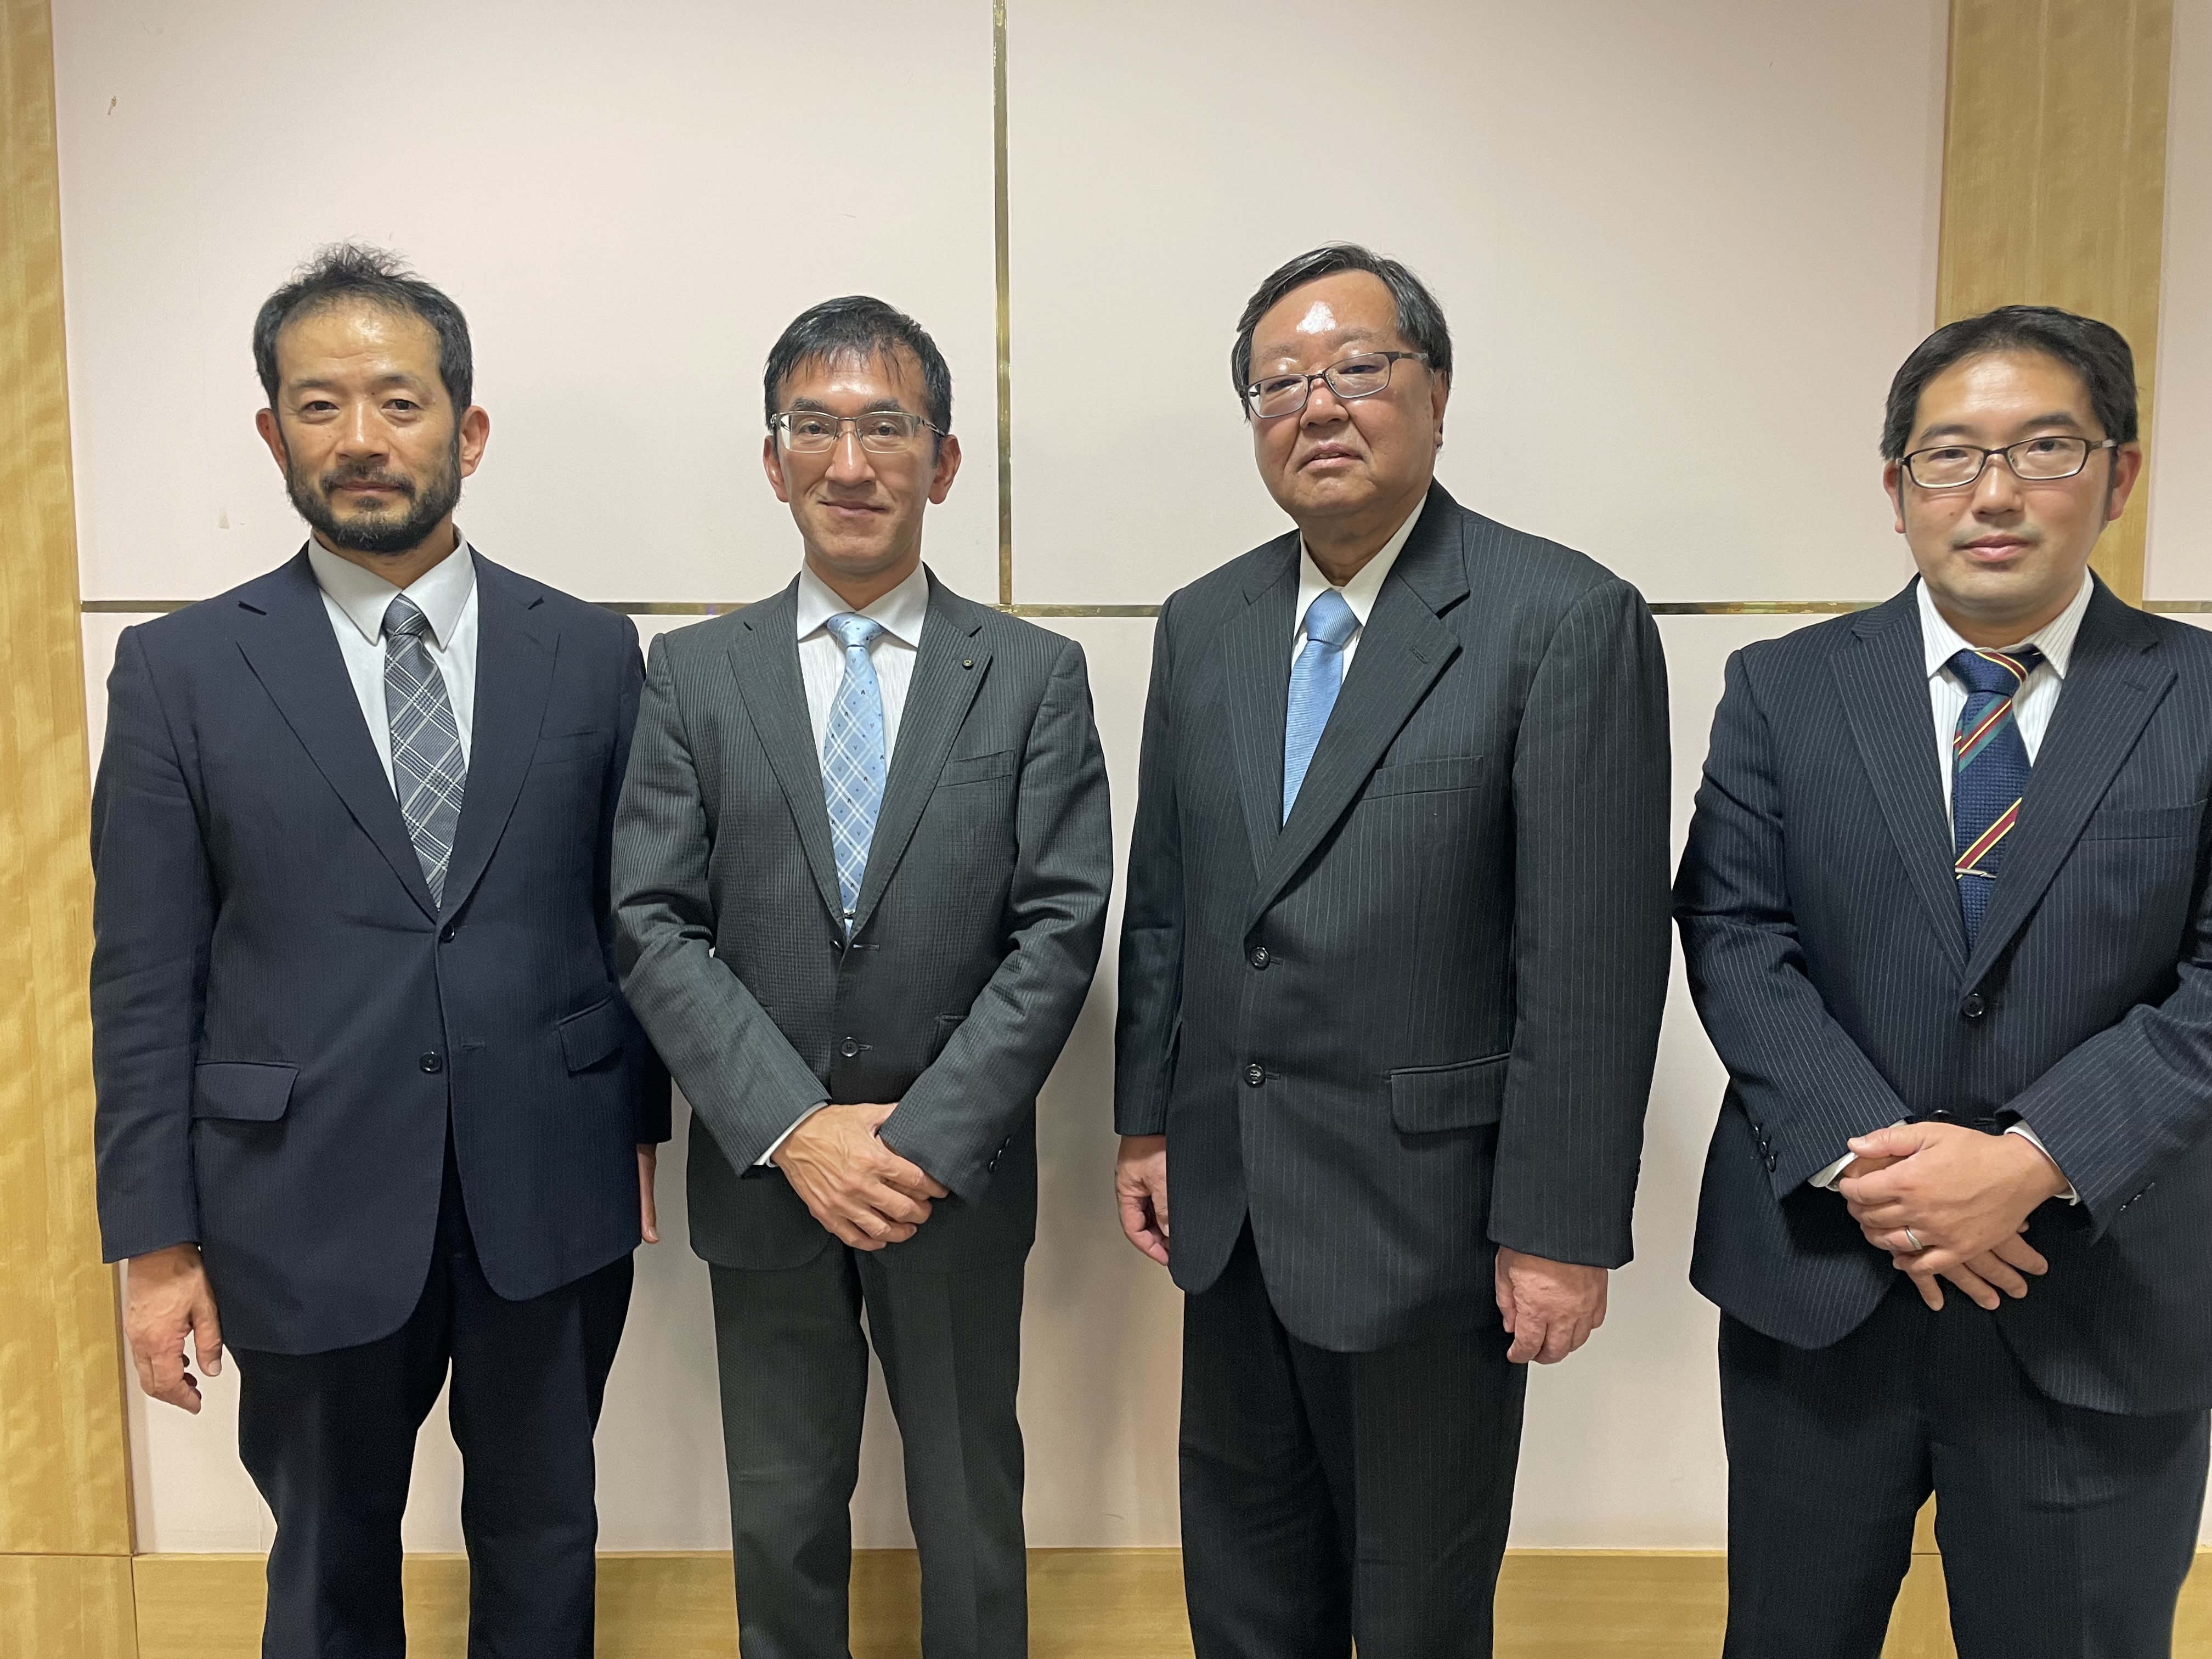 ①From left, Director NANBA, manager KAMIYAMA, Secretary HORIE, Associate Professor WADA (Mr. TSUBOI is not in this photo)